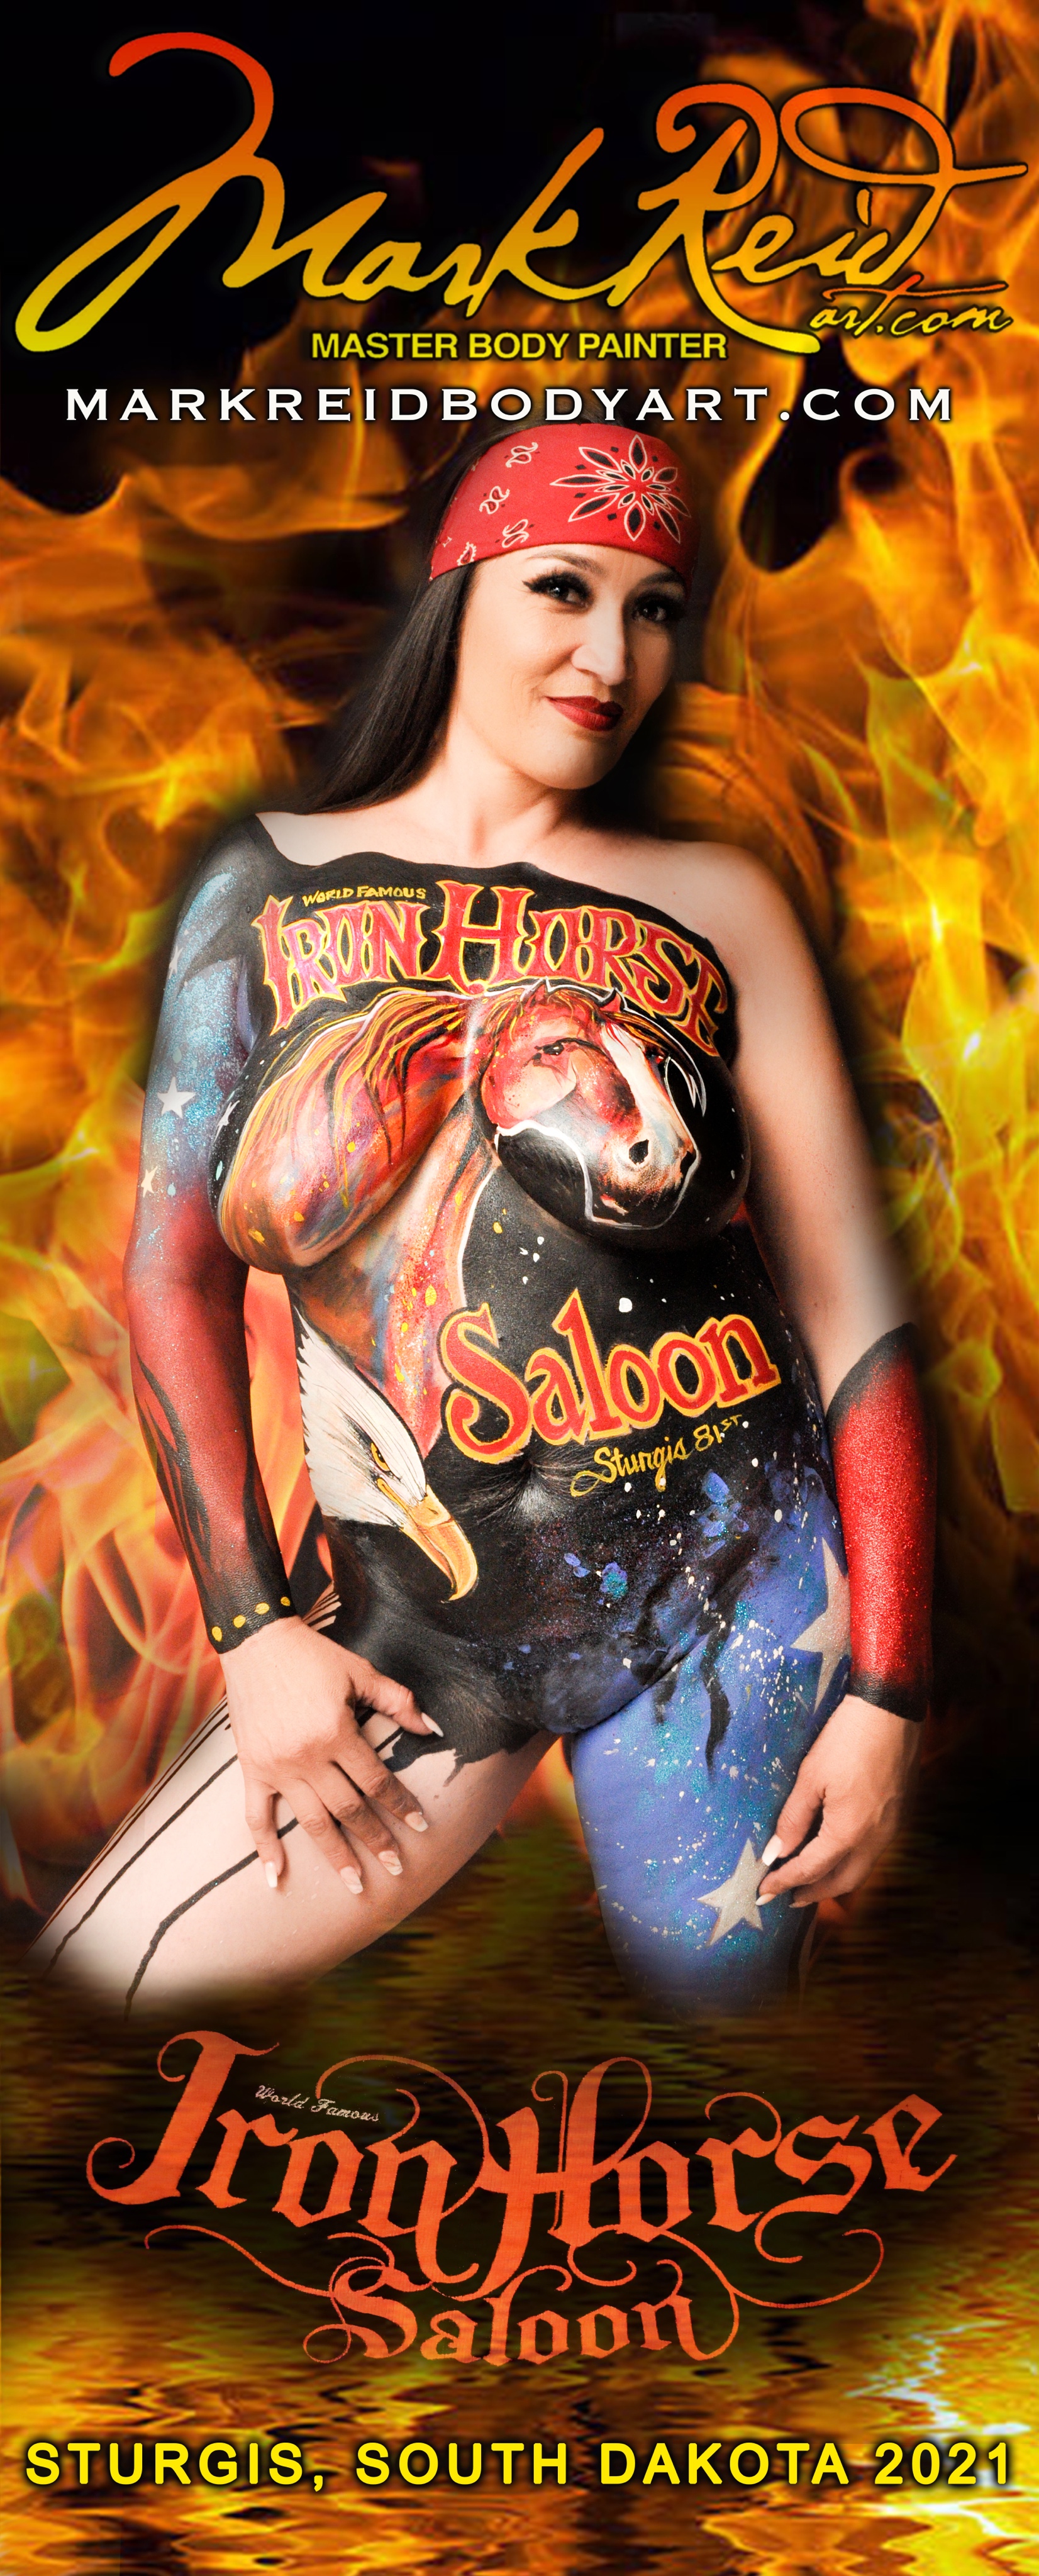 brunette with a stylized body painting of a horse on her top featuring the words Iron Horse Saloon 2021